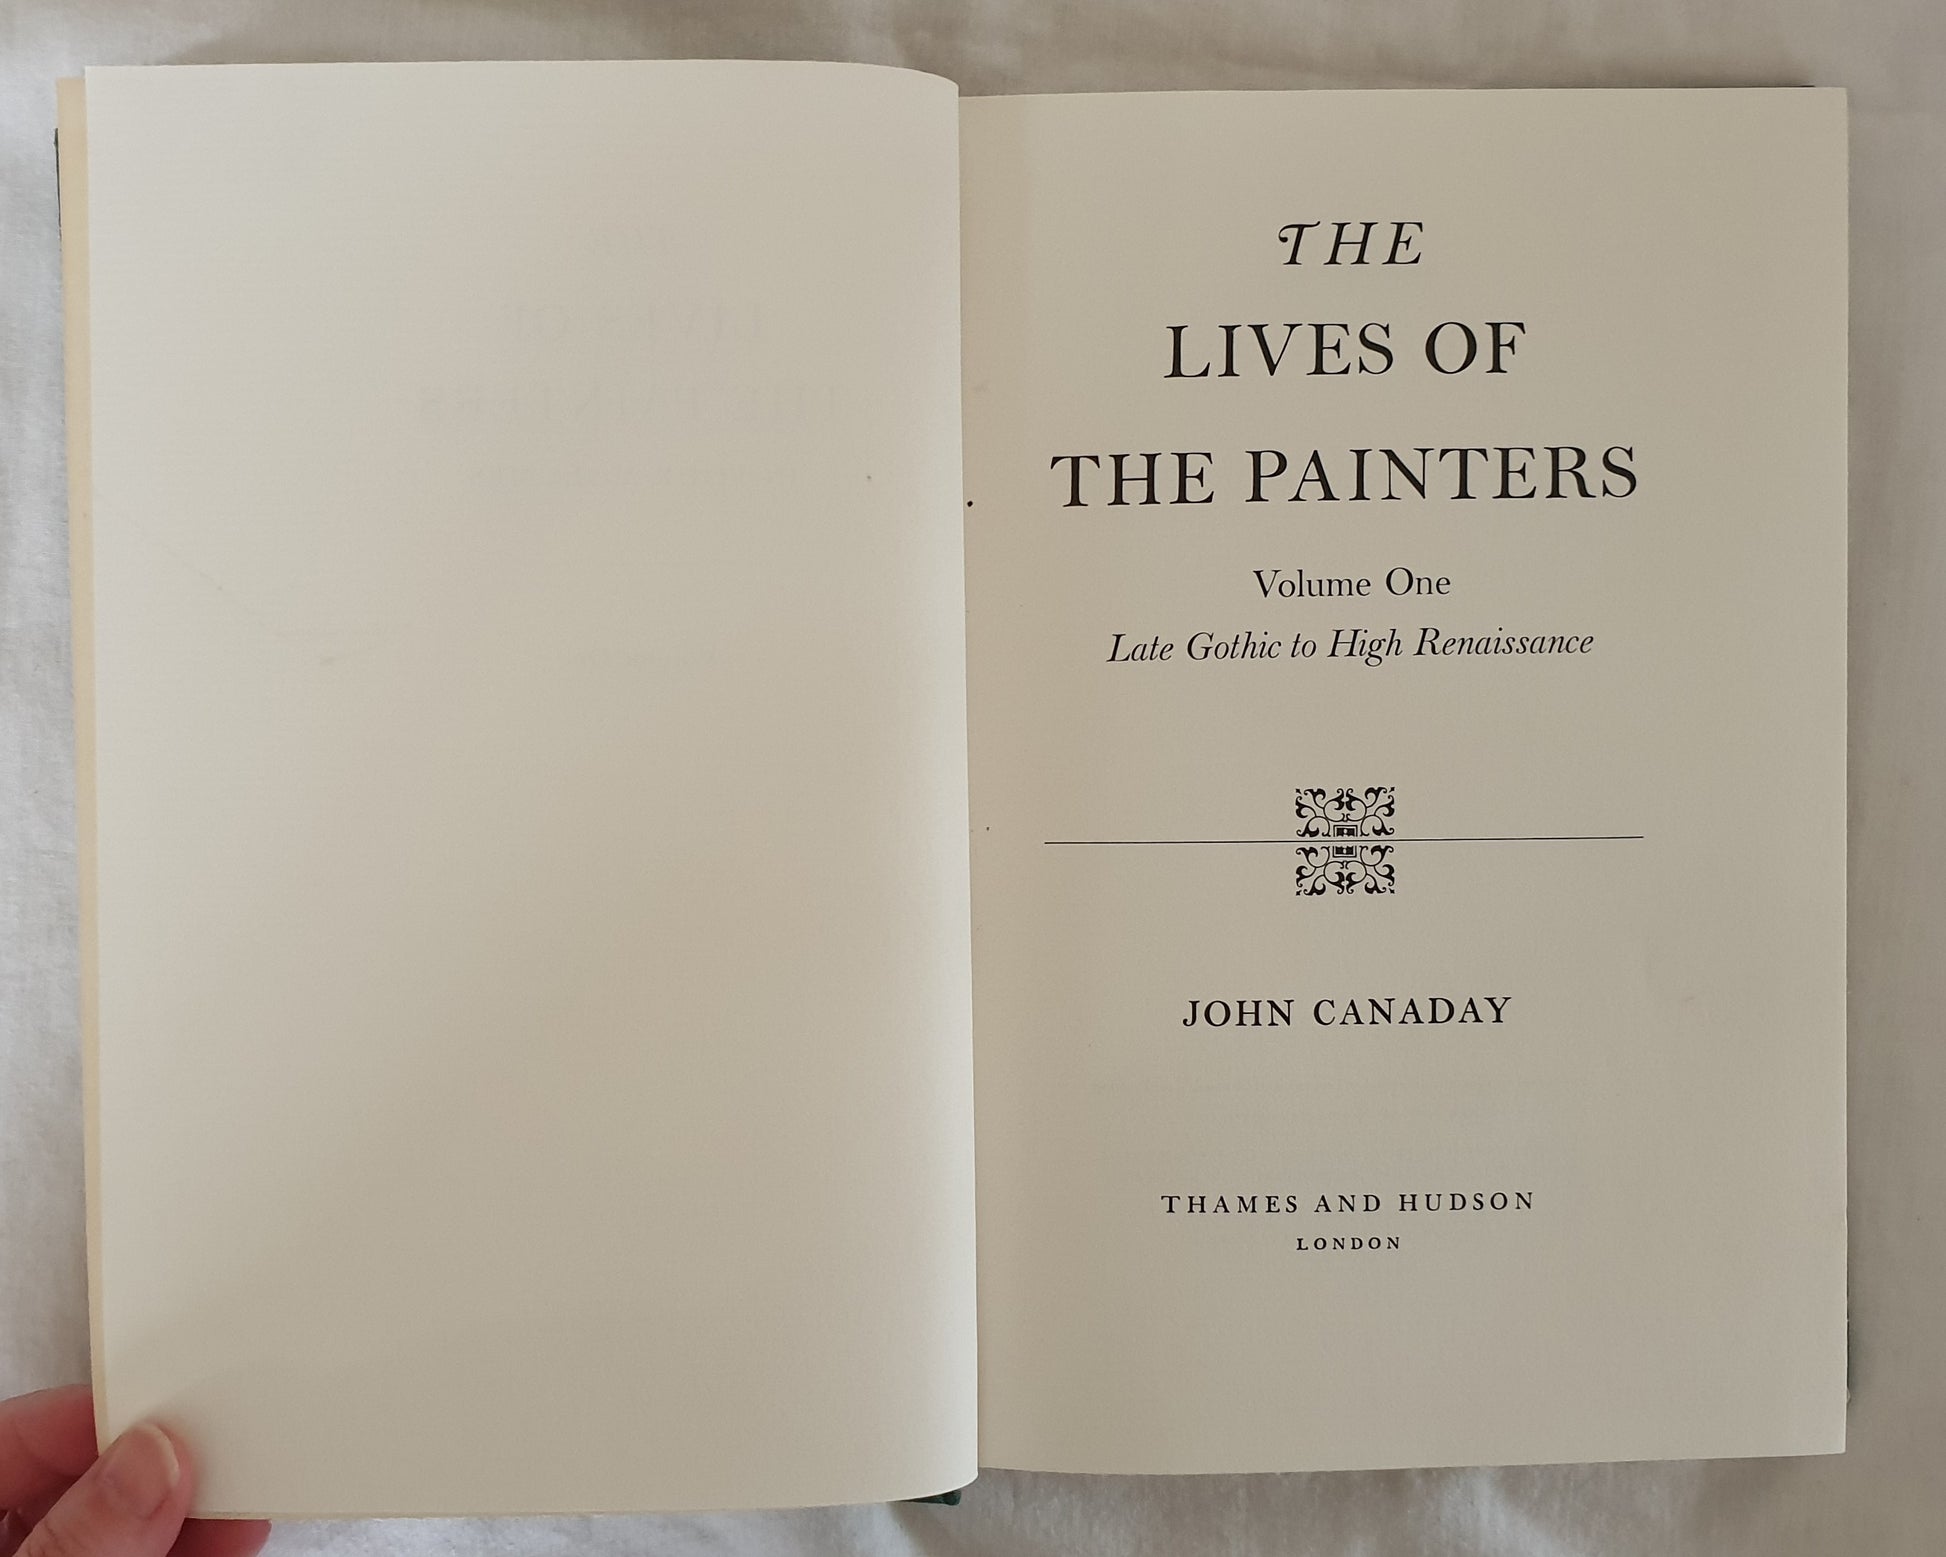 The Lives of the Painters In Four Volumes  Volume One  Late Gothic to High Renaissance  by John Canaday